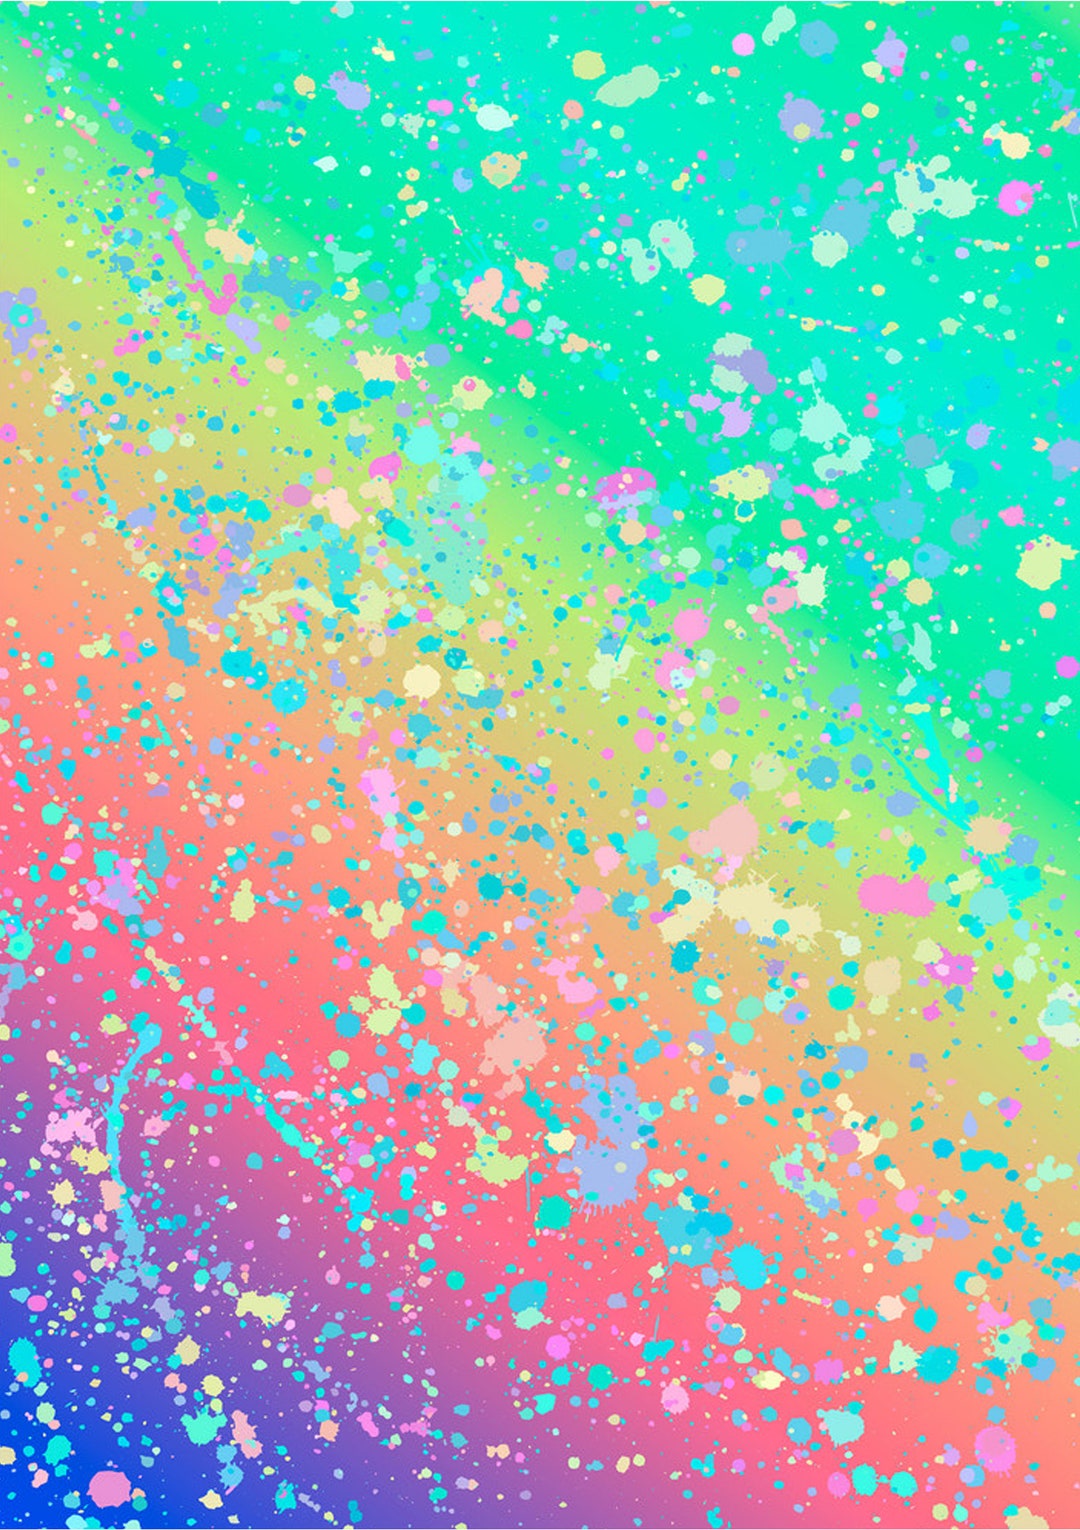 12 X 17 Abstract Colorful Rainbow Paint Splashes Watercolor Background ...